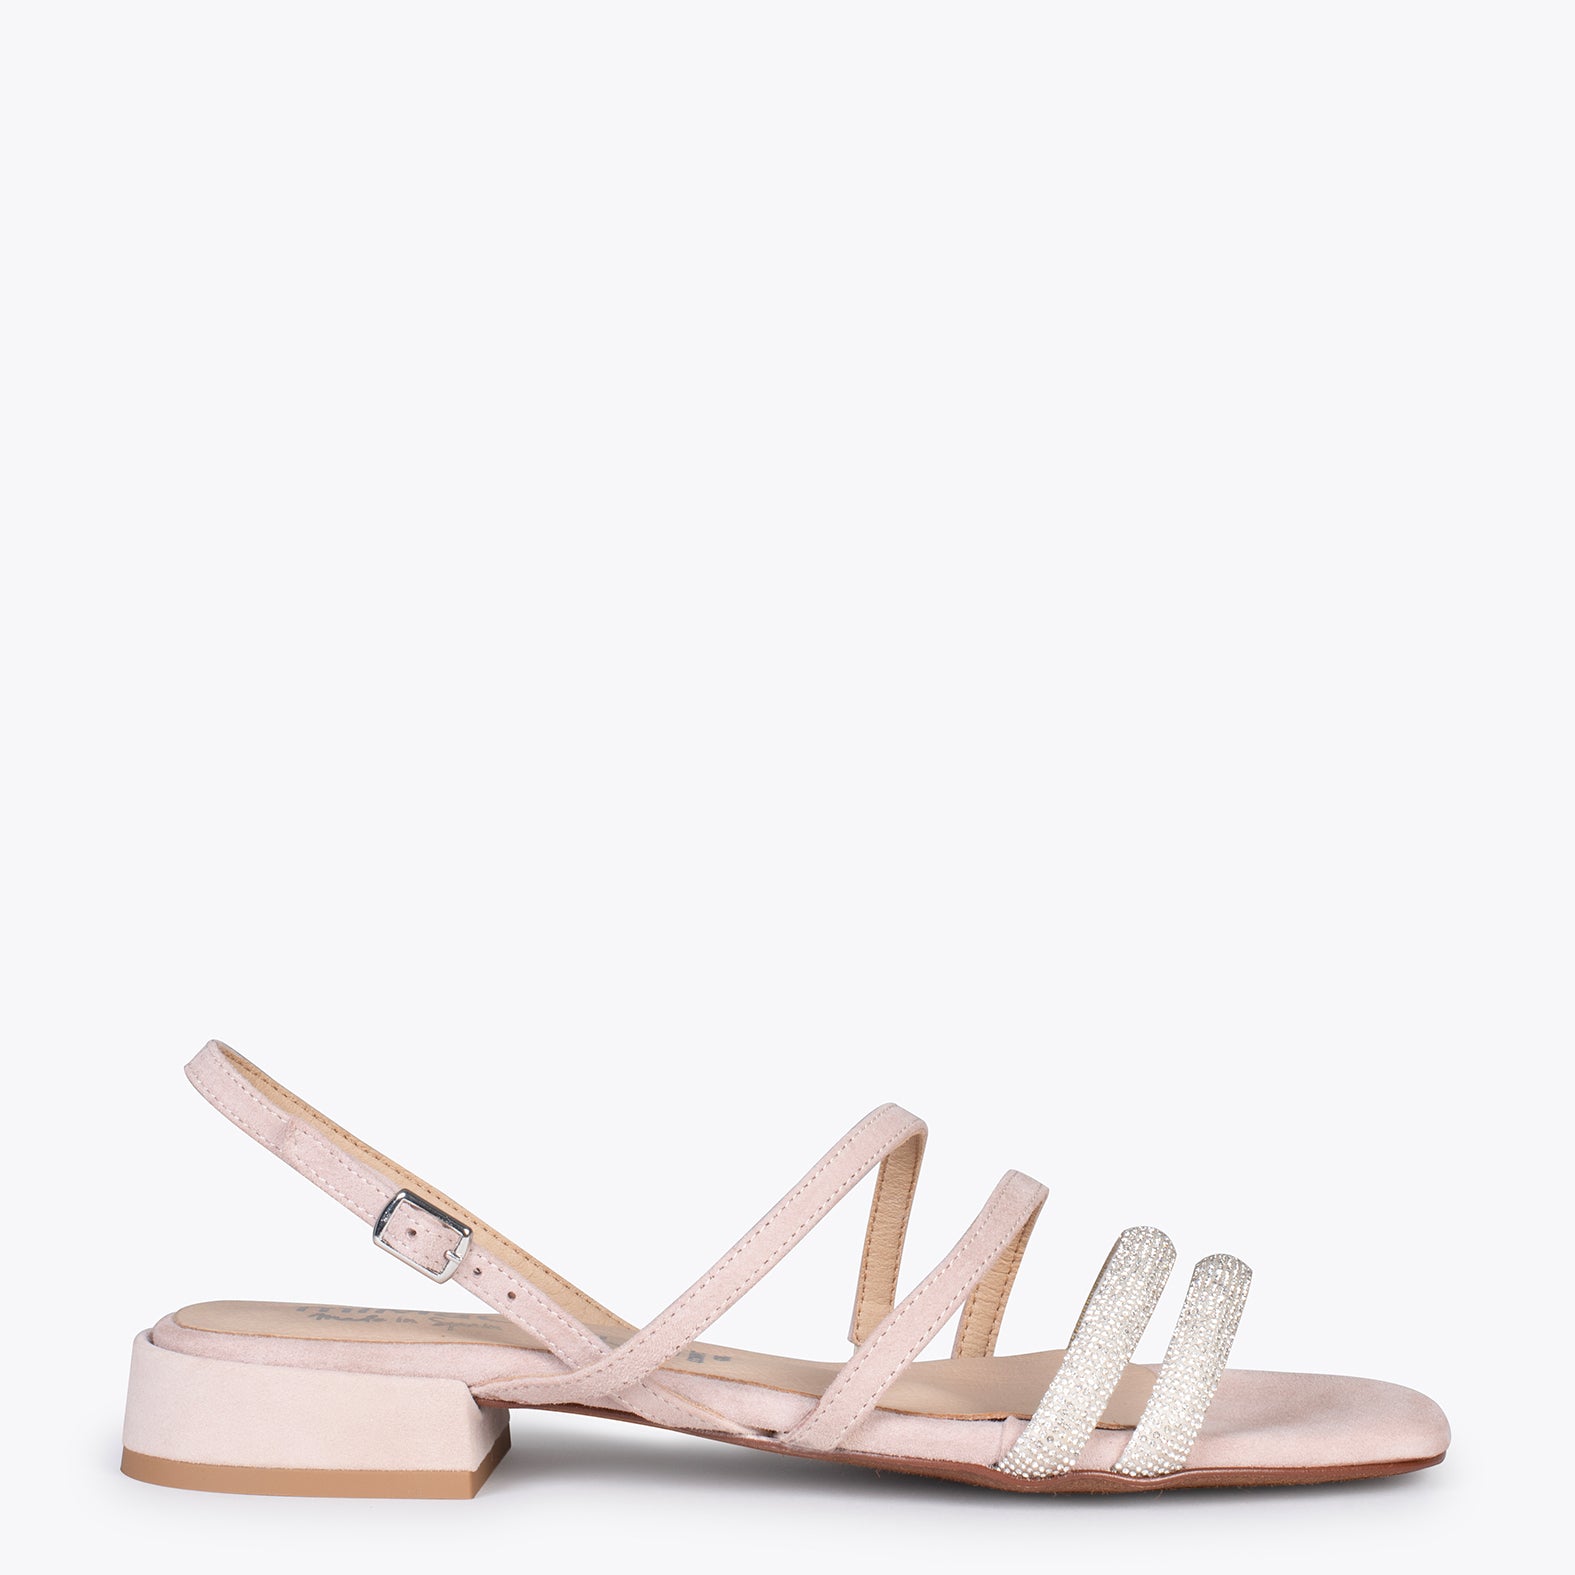 OSLO – NUDE flat sandals with shiny straps